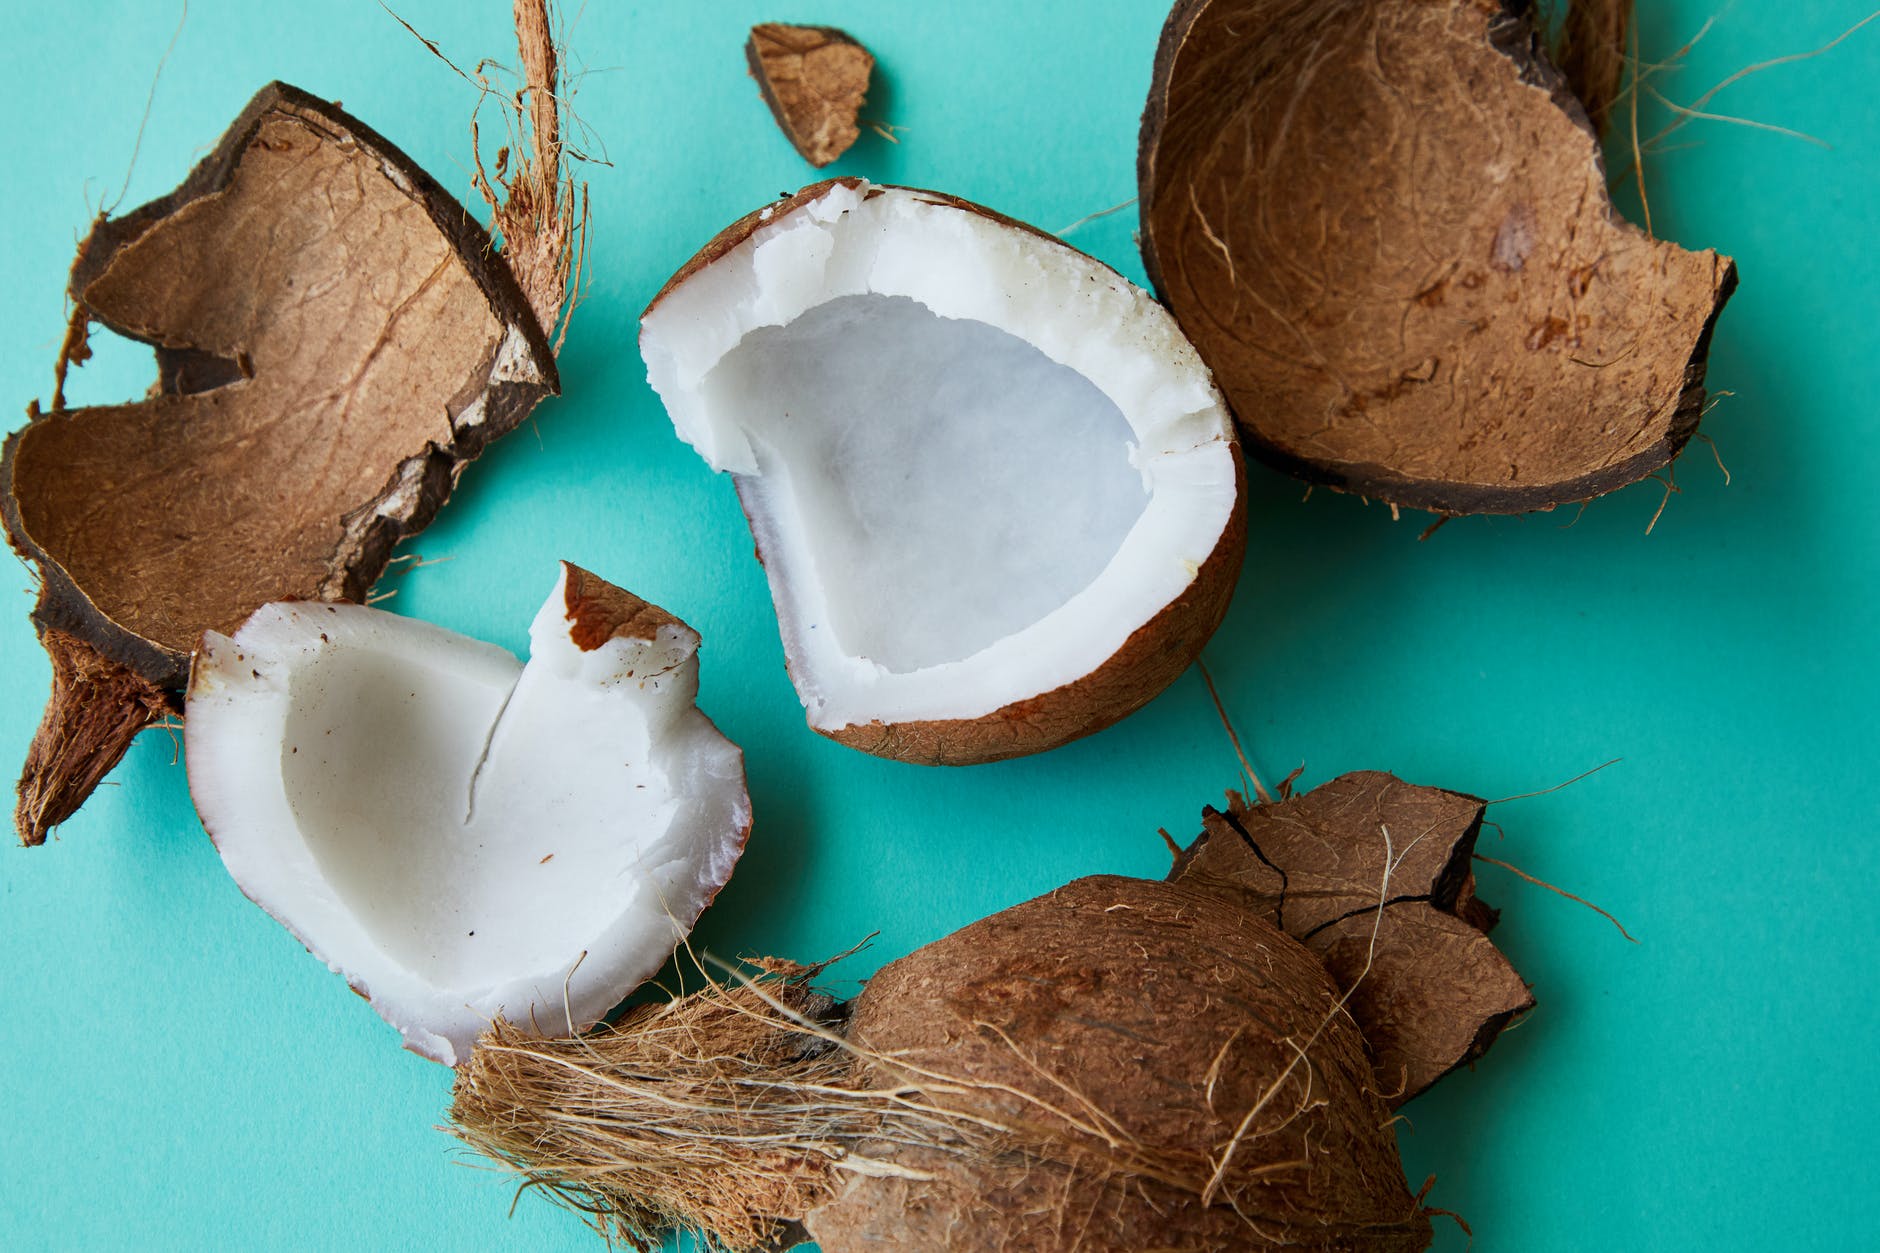 pieces of cracked coconut with aromatic white pulp